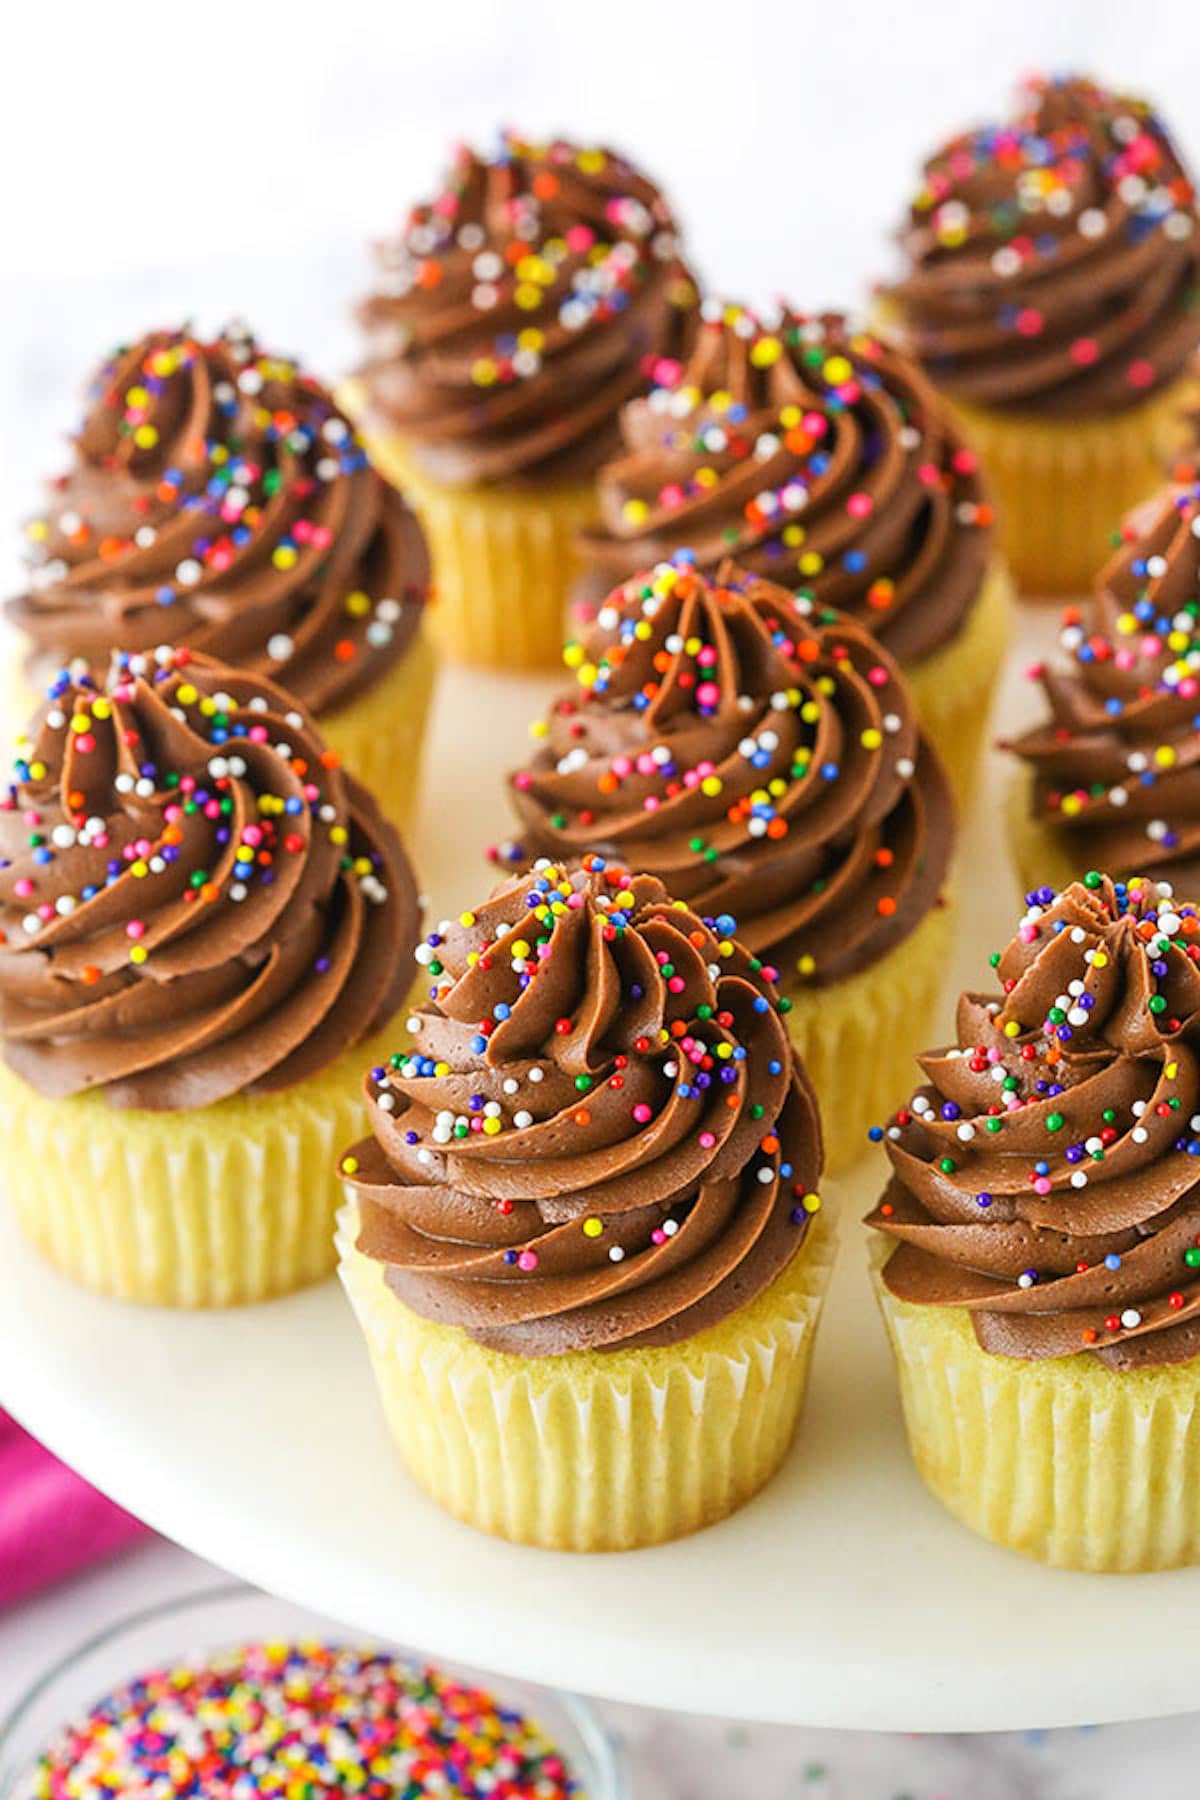 A Platter Full of Yellow Cupcakes with Chocolate Buttercream